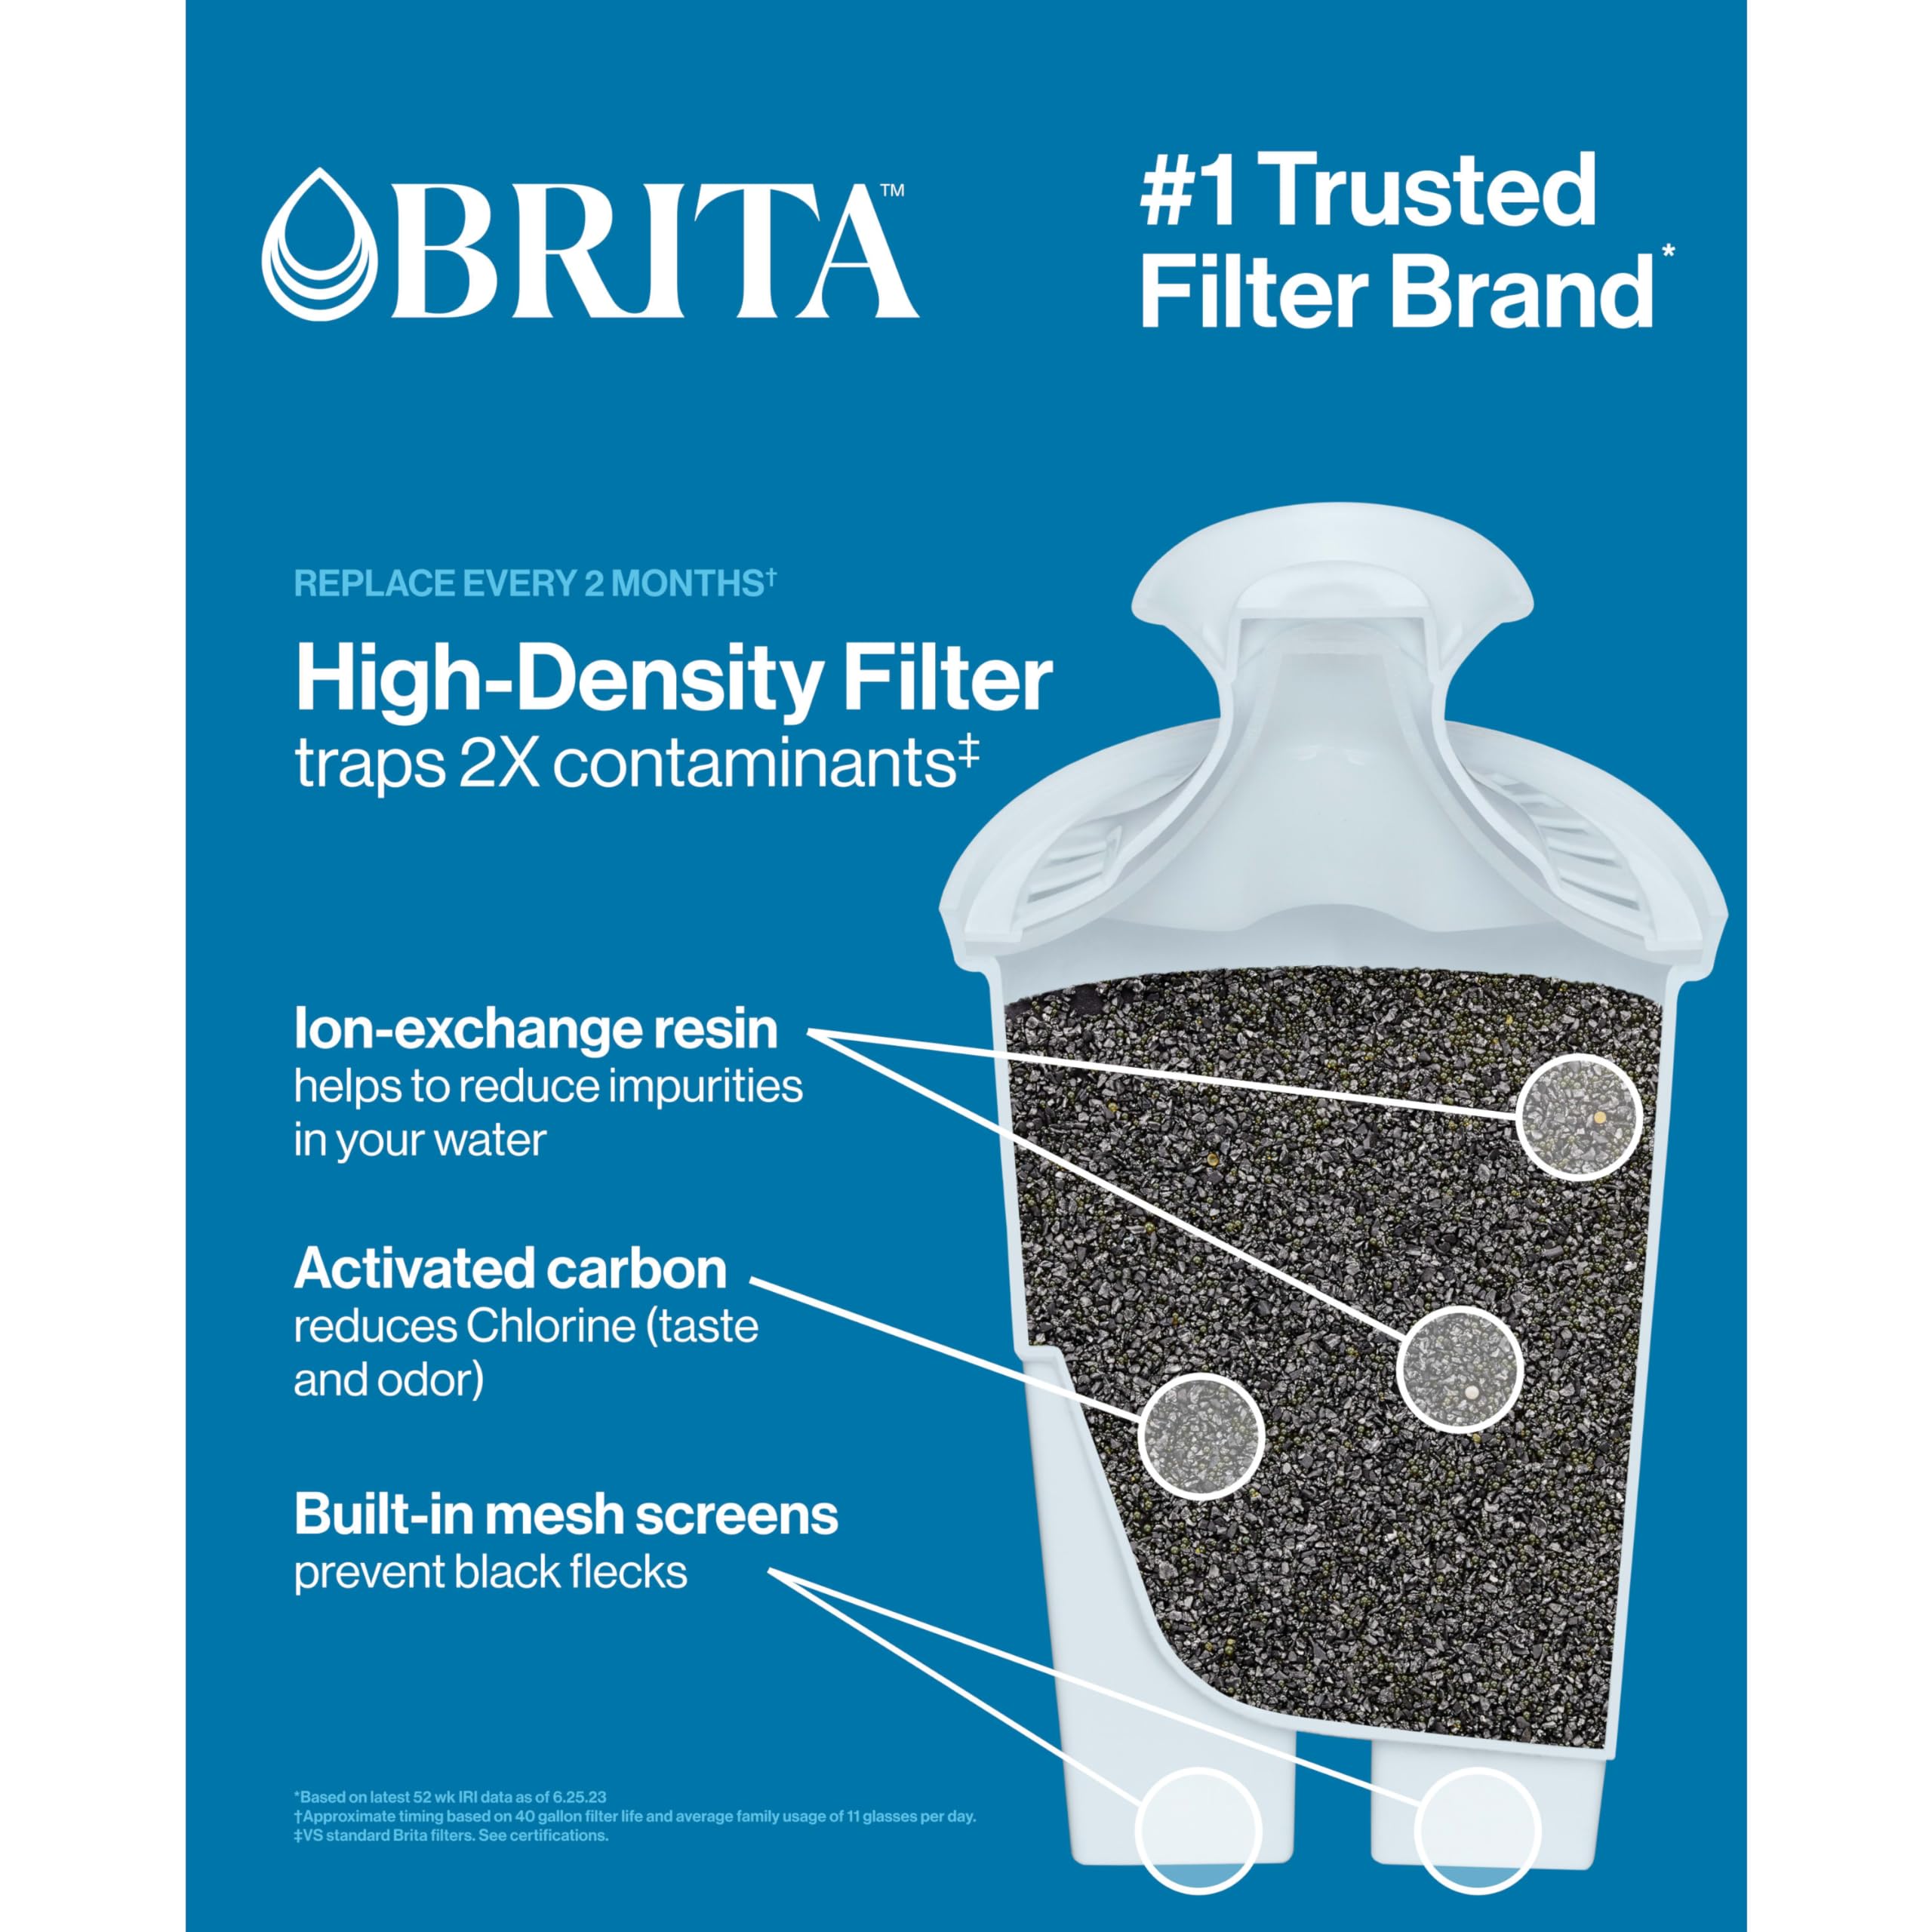 Brita Plus Water Filter, High Density Replacement Filter for Pitchers and Dispensers, Reduces 2x Contaminants*, Lasts 2 Months, 2 Count